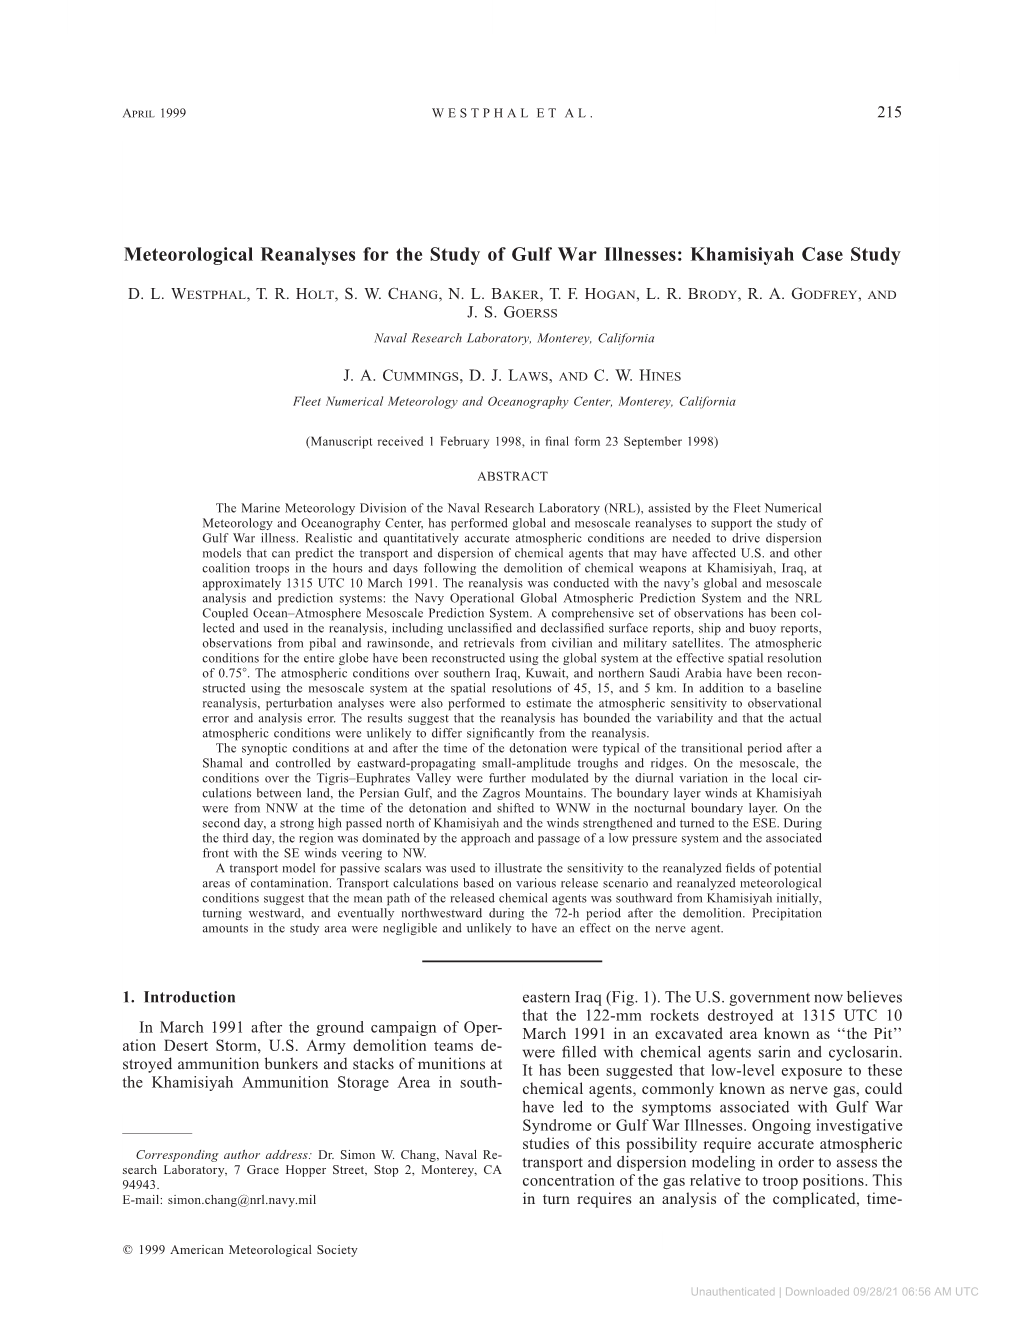 Meteorological Reanalyses for the Study of Gulf War Illnesses: Khamisiyah Case Study